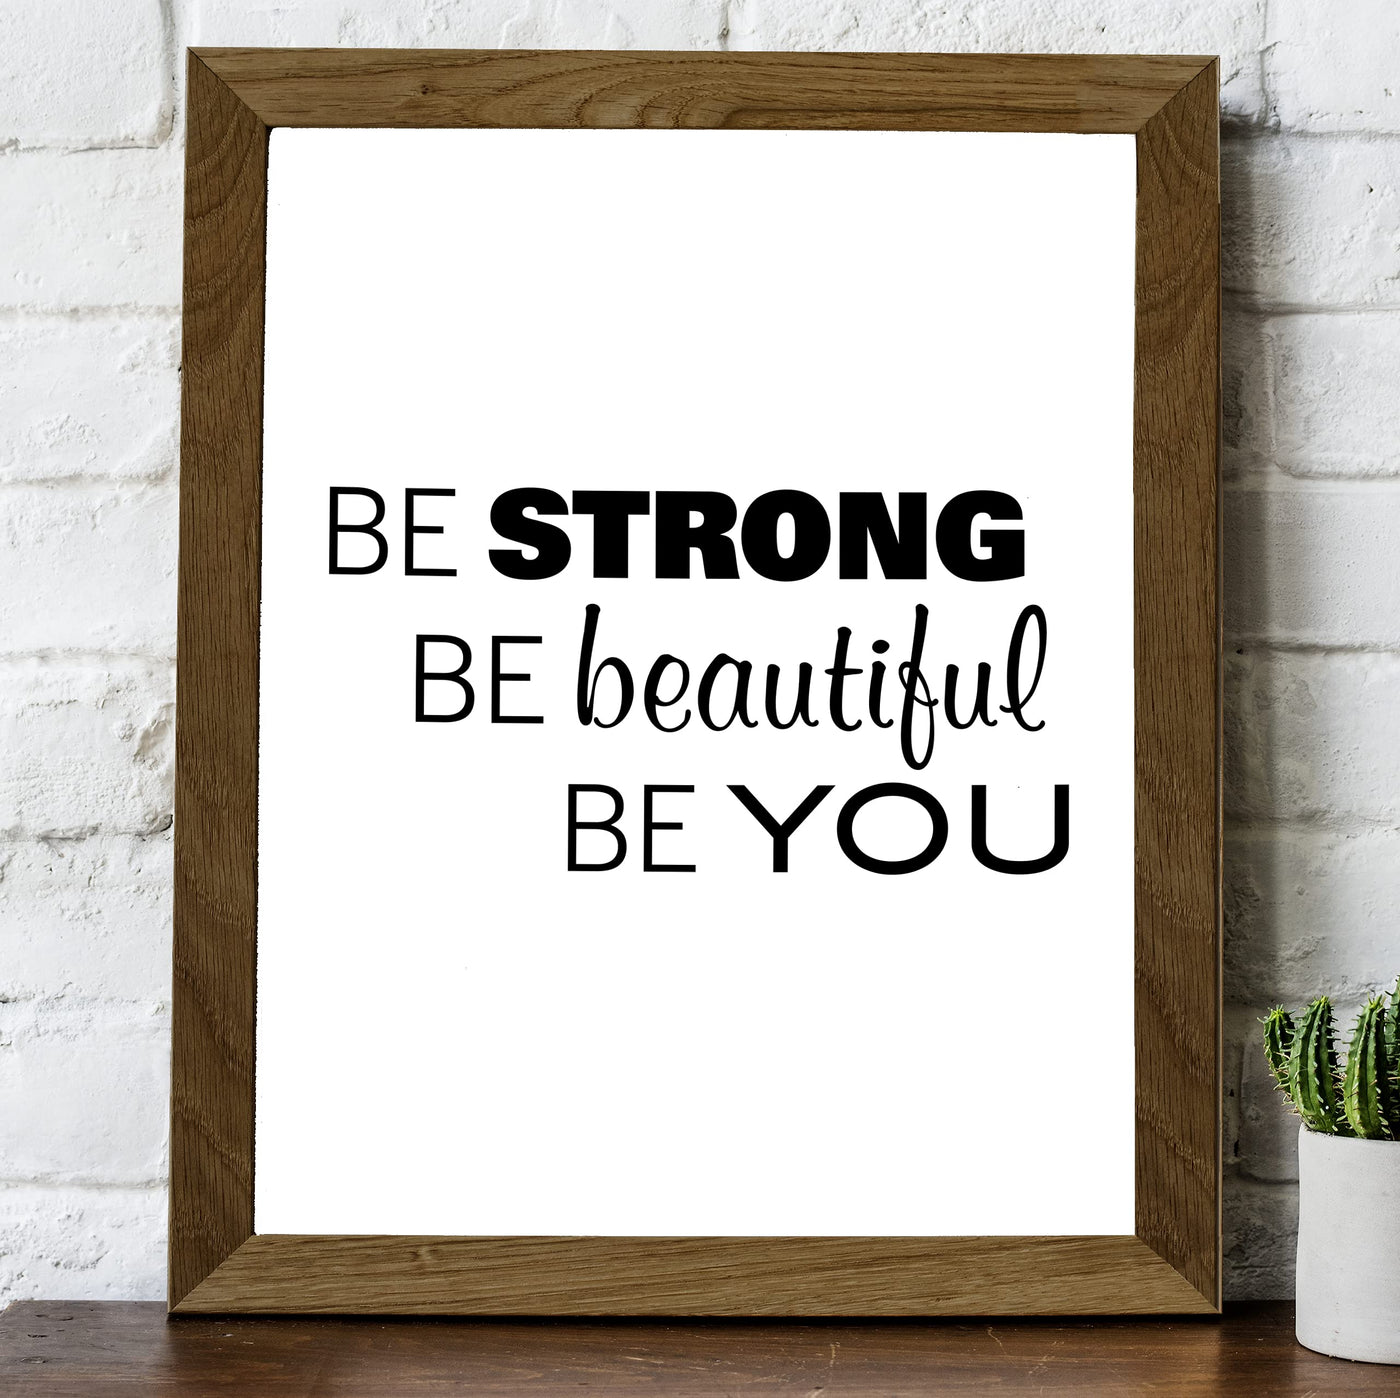 Be Strong-Beautiful-Be You Inspirational Quotes Wall Sign-8x10" Farmhouse Art Print-Ready to Frame. Modern Typography Design. Motivational Home-Office-Desk-School Decor. Great Gift for Inspiration!